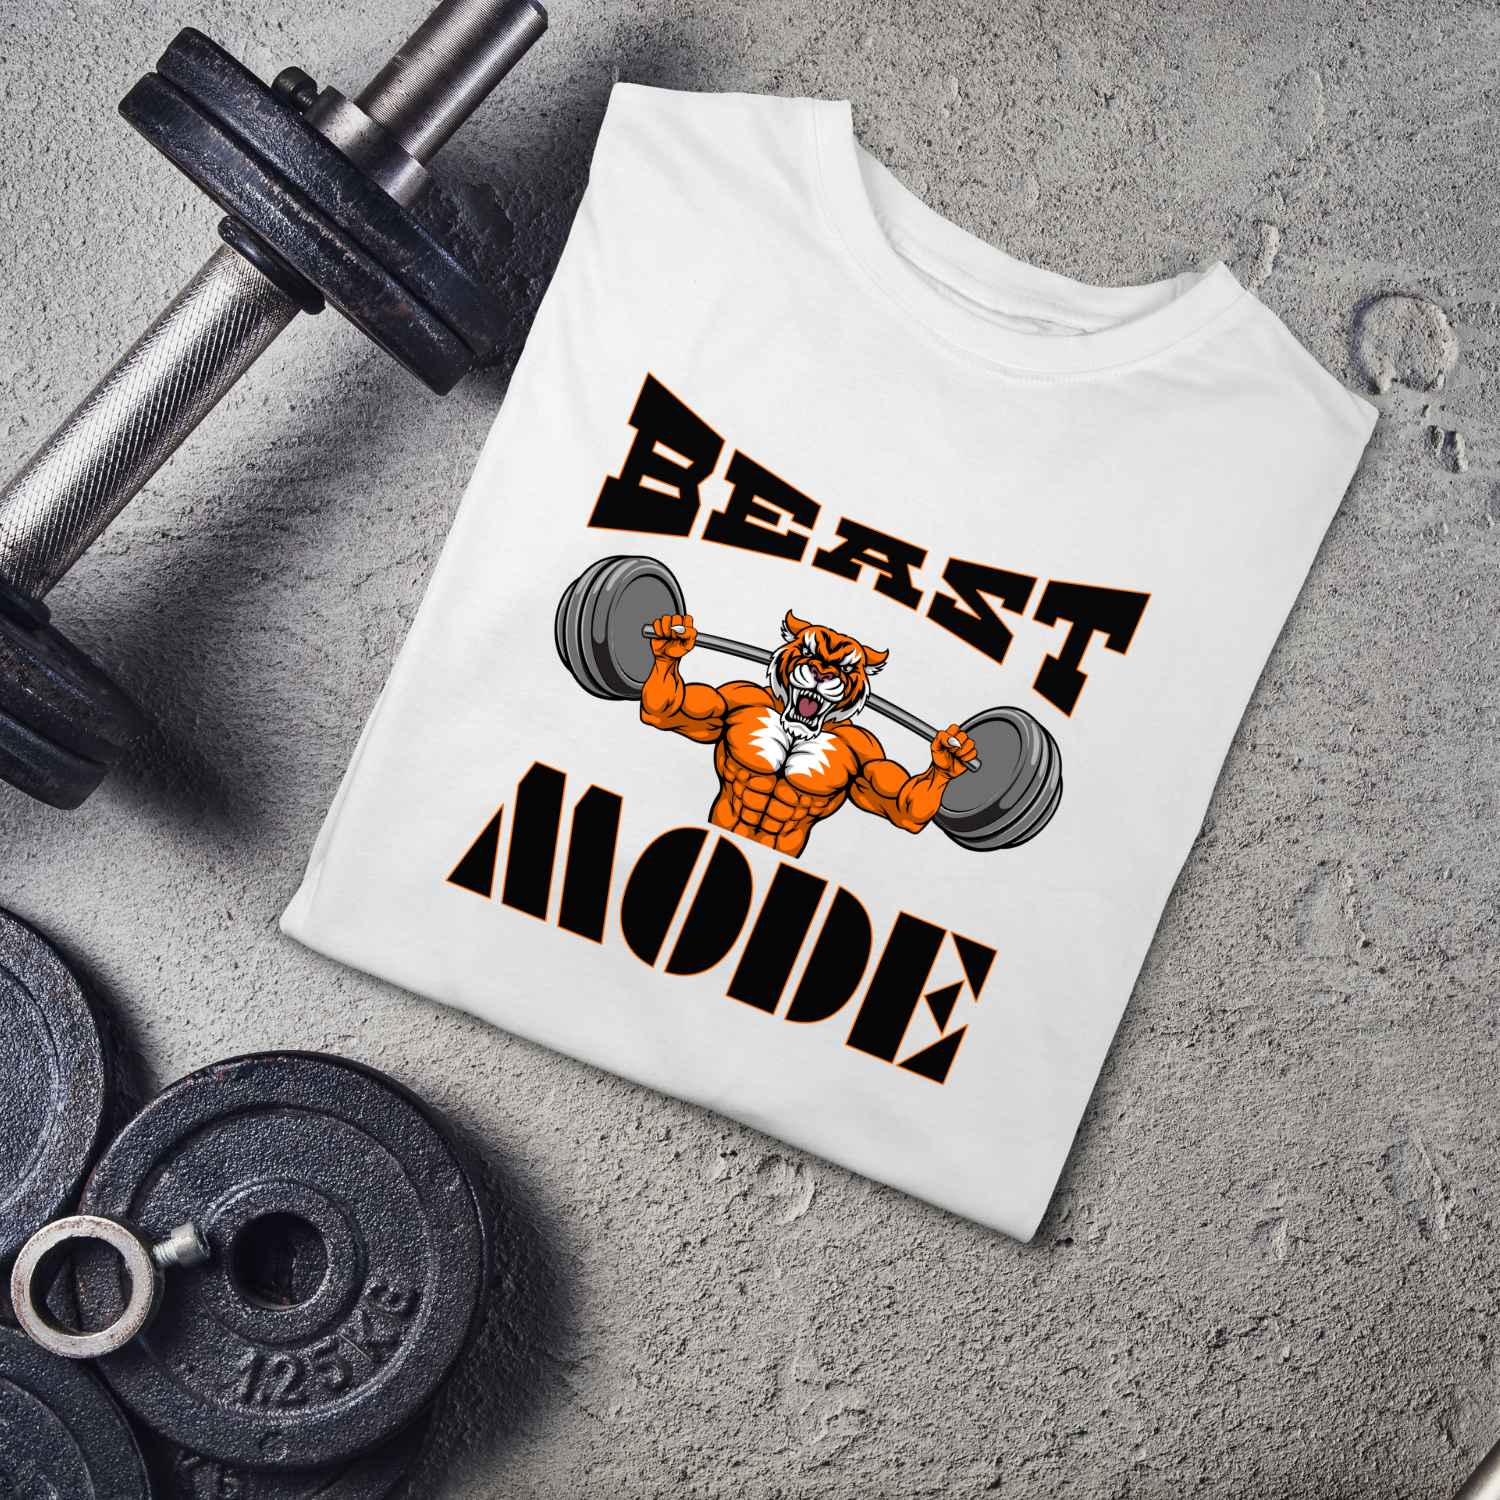 Beast Mode Gym T-Shirt Design Free | For Fitness Enthusiasts